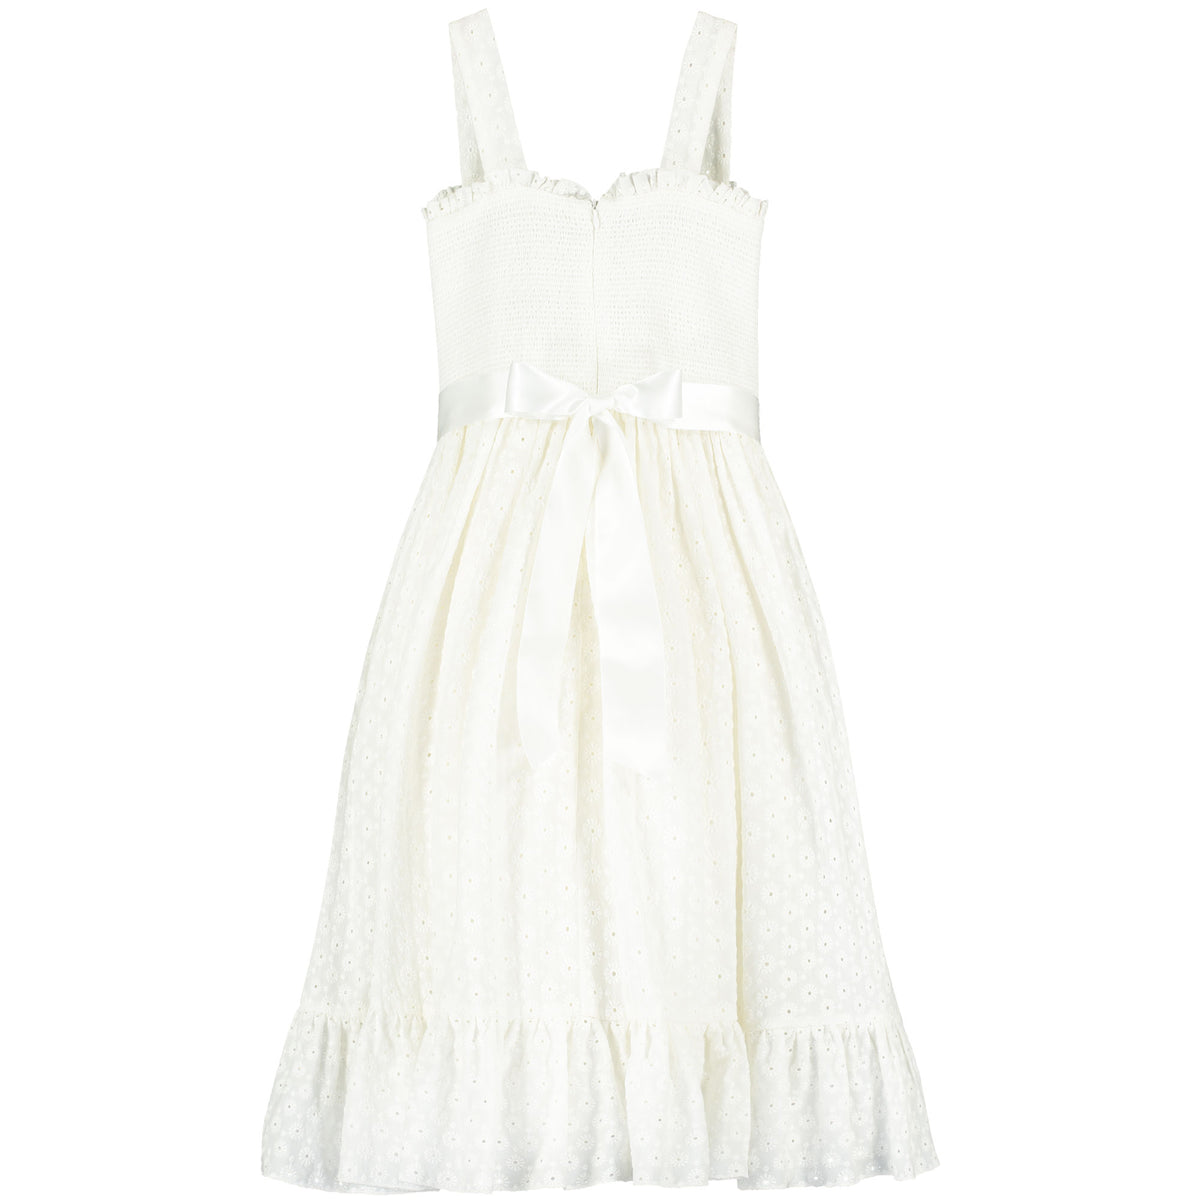 Smocked Embroidered Cotton Girls Occasion Dress White | Holly Hastie London